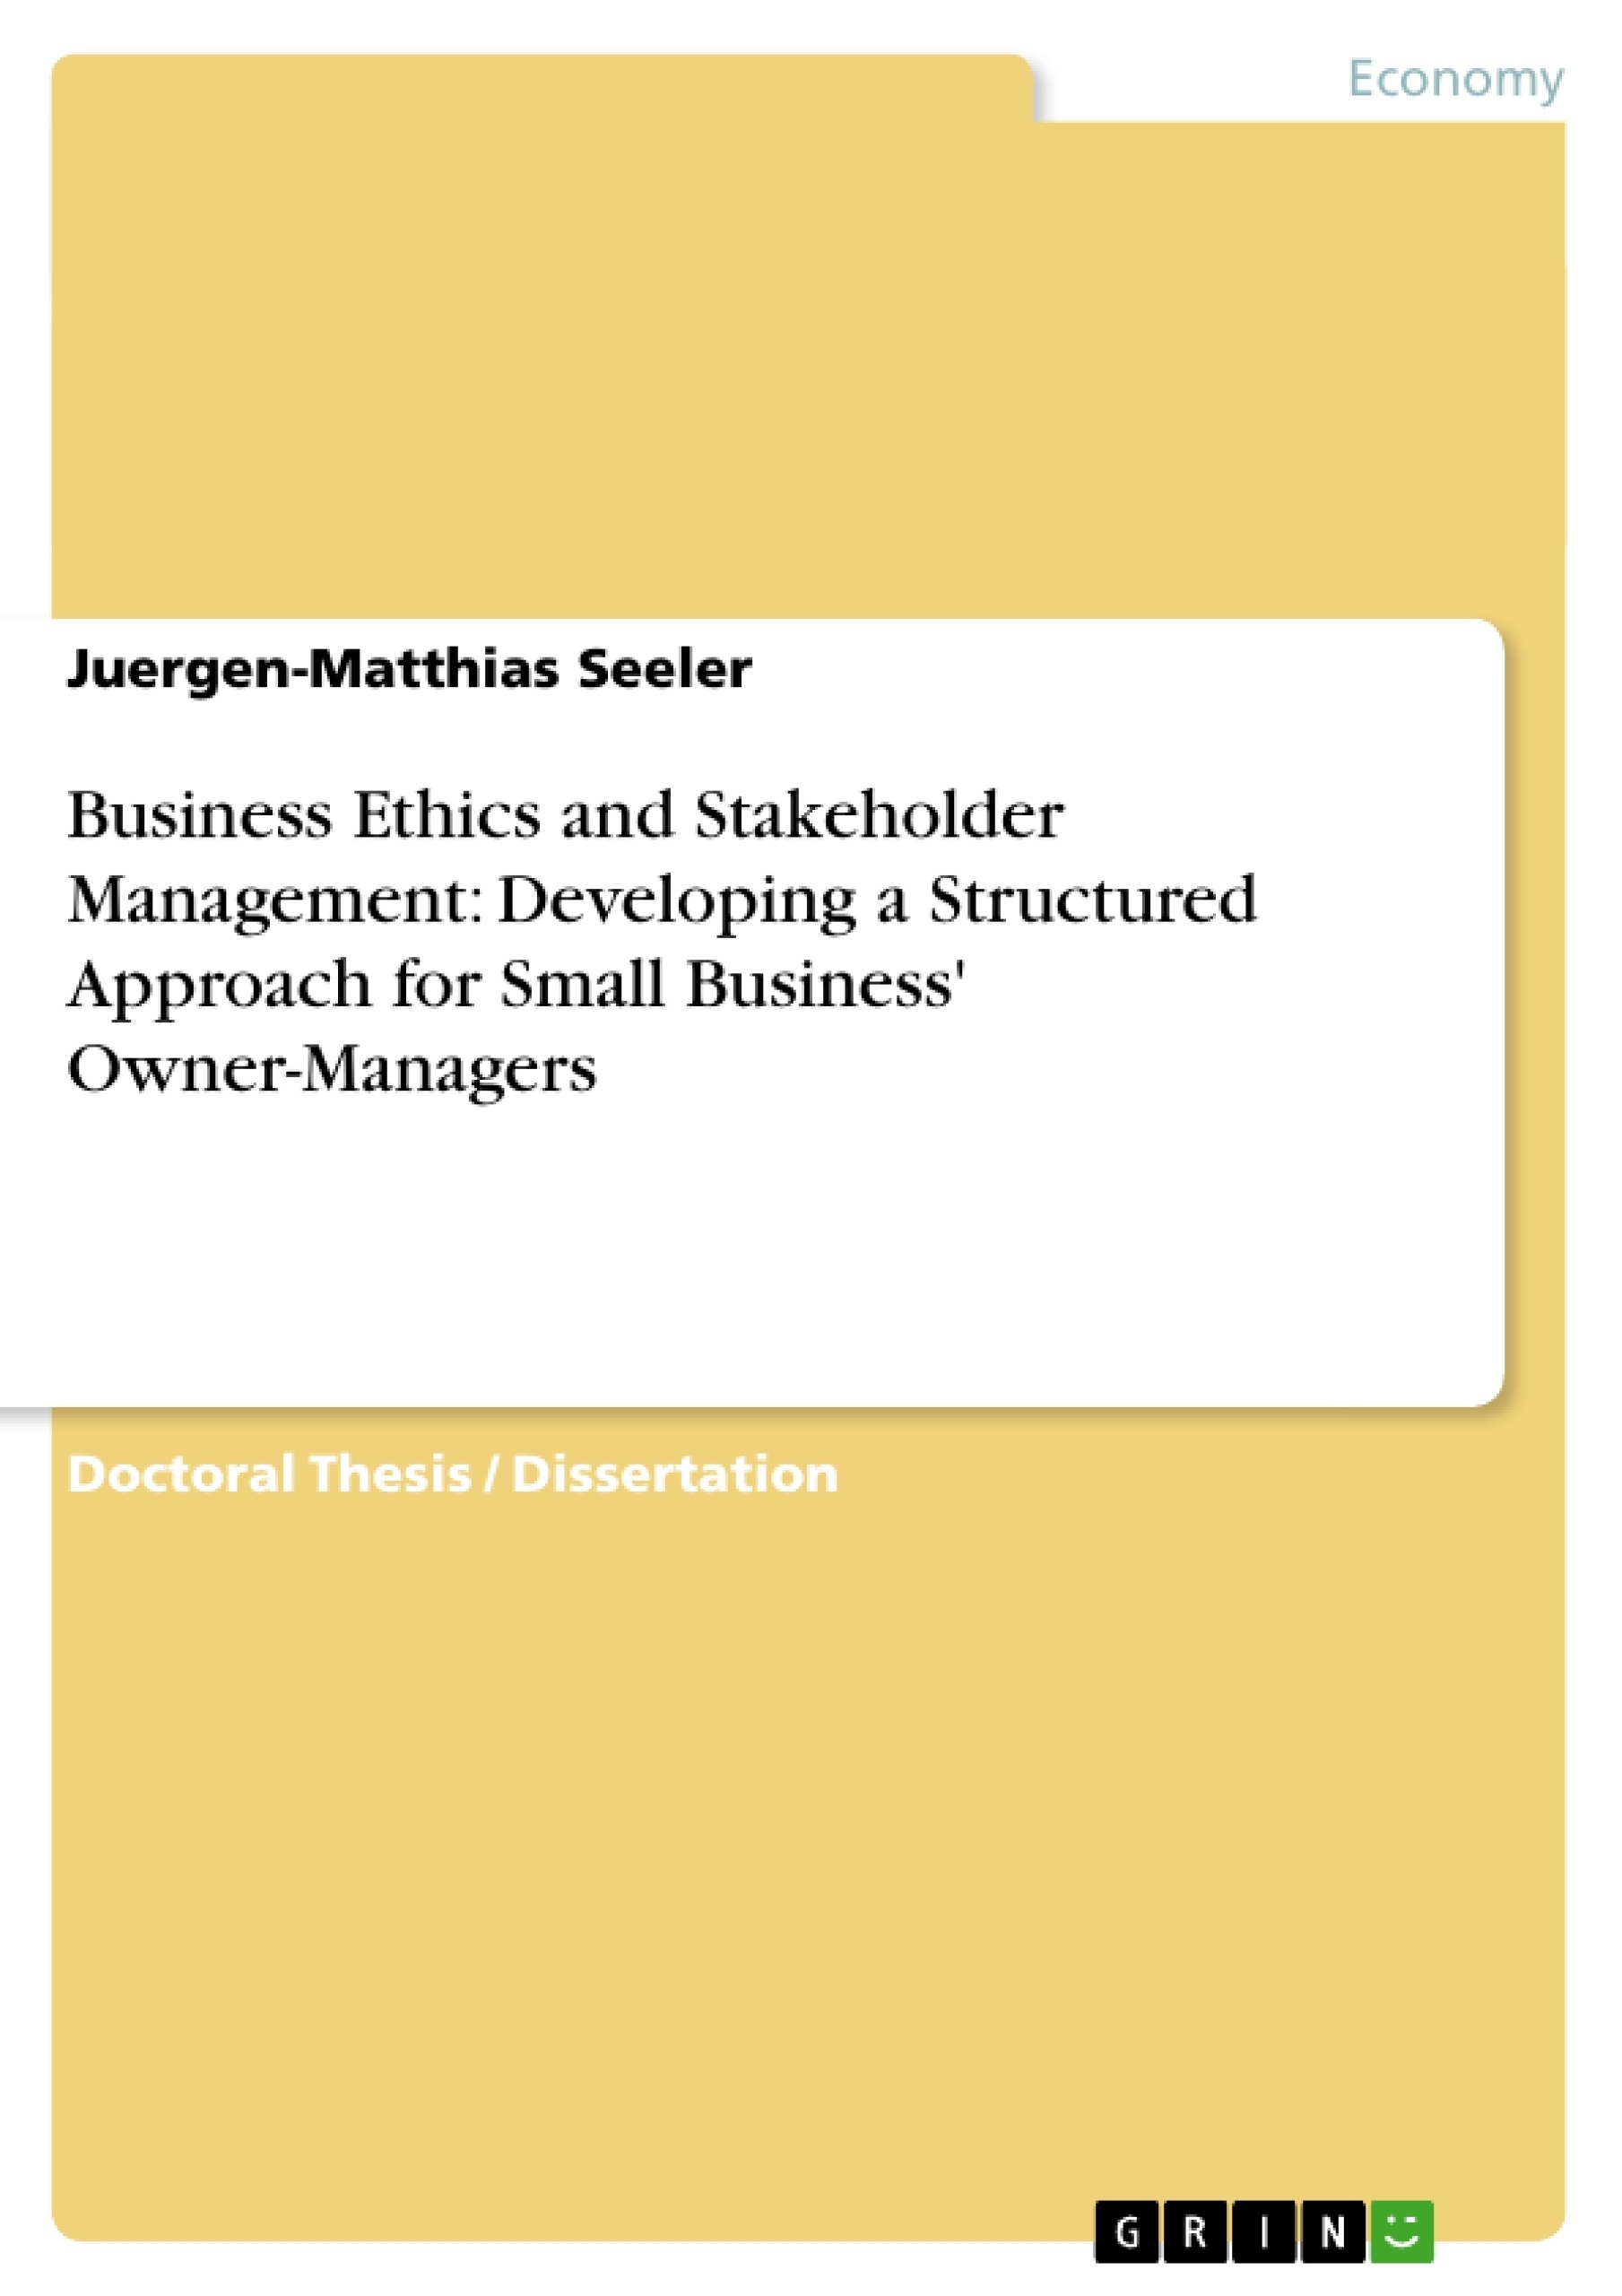 Titre: Business Ethics and Stakeholder Management: Developing a Structured Approach for Small Business' Owner-Managers